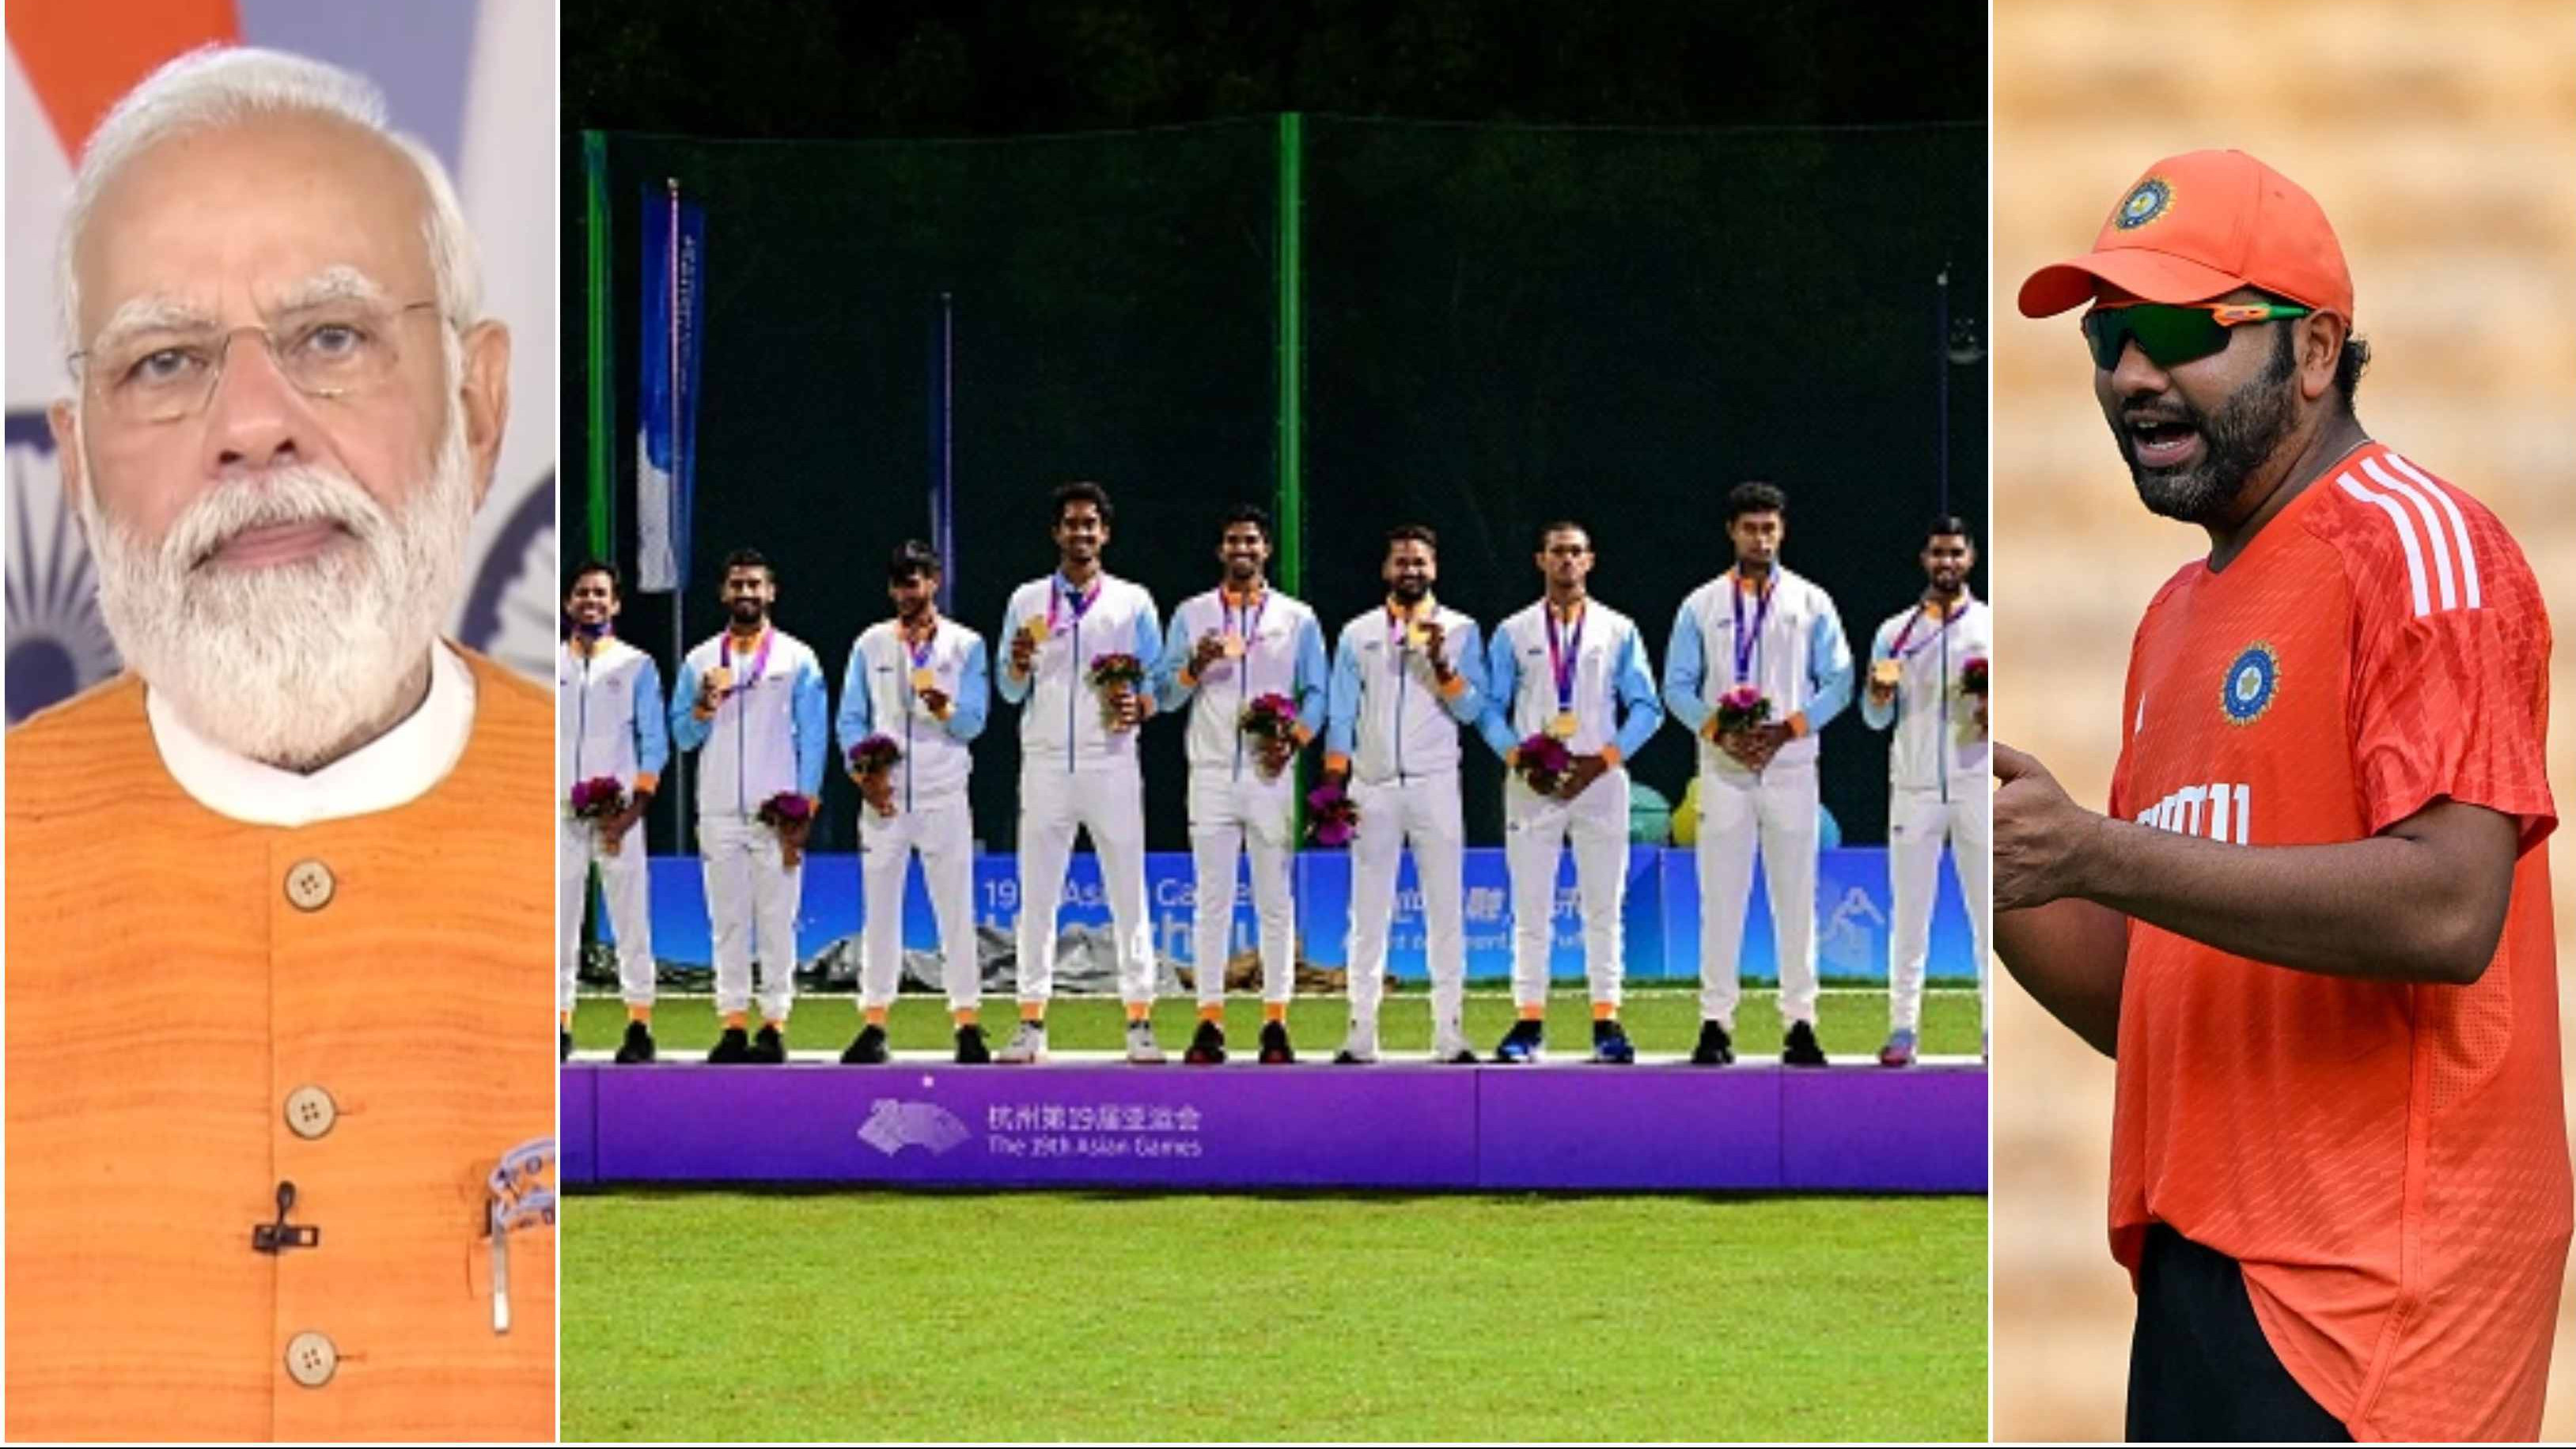 Rohit Sharma, PM Modi congratulate Indian men’s cricket team on winning gold medal in Asian Games